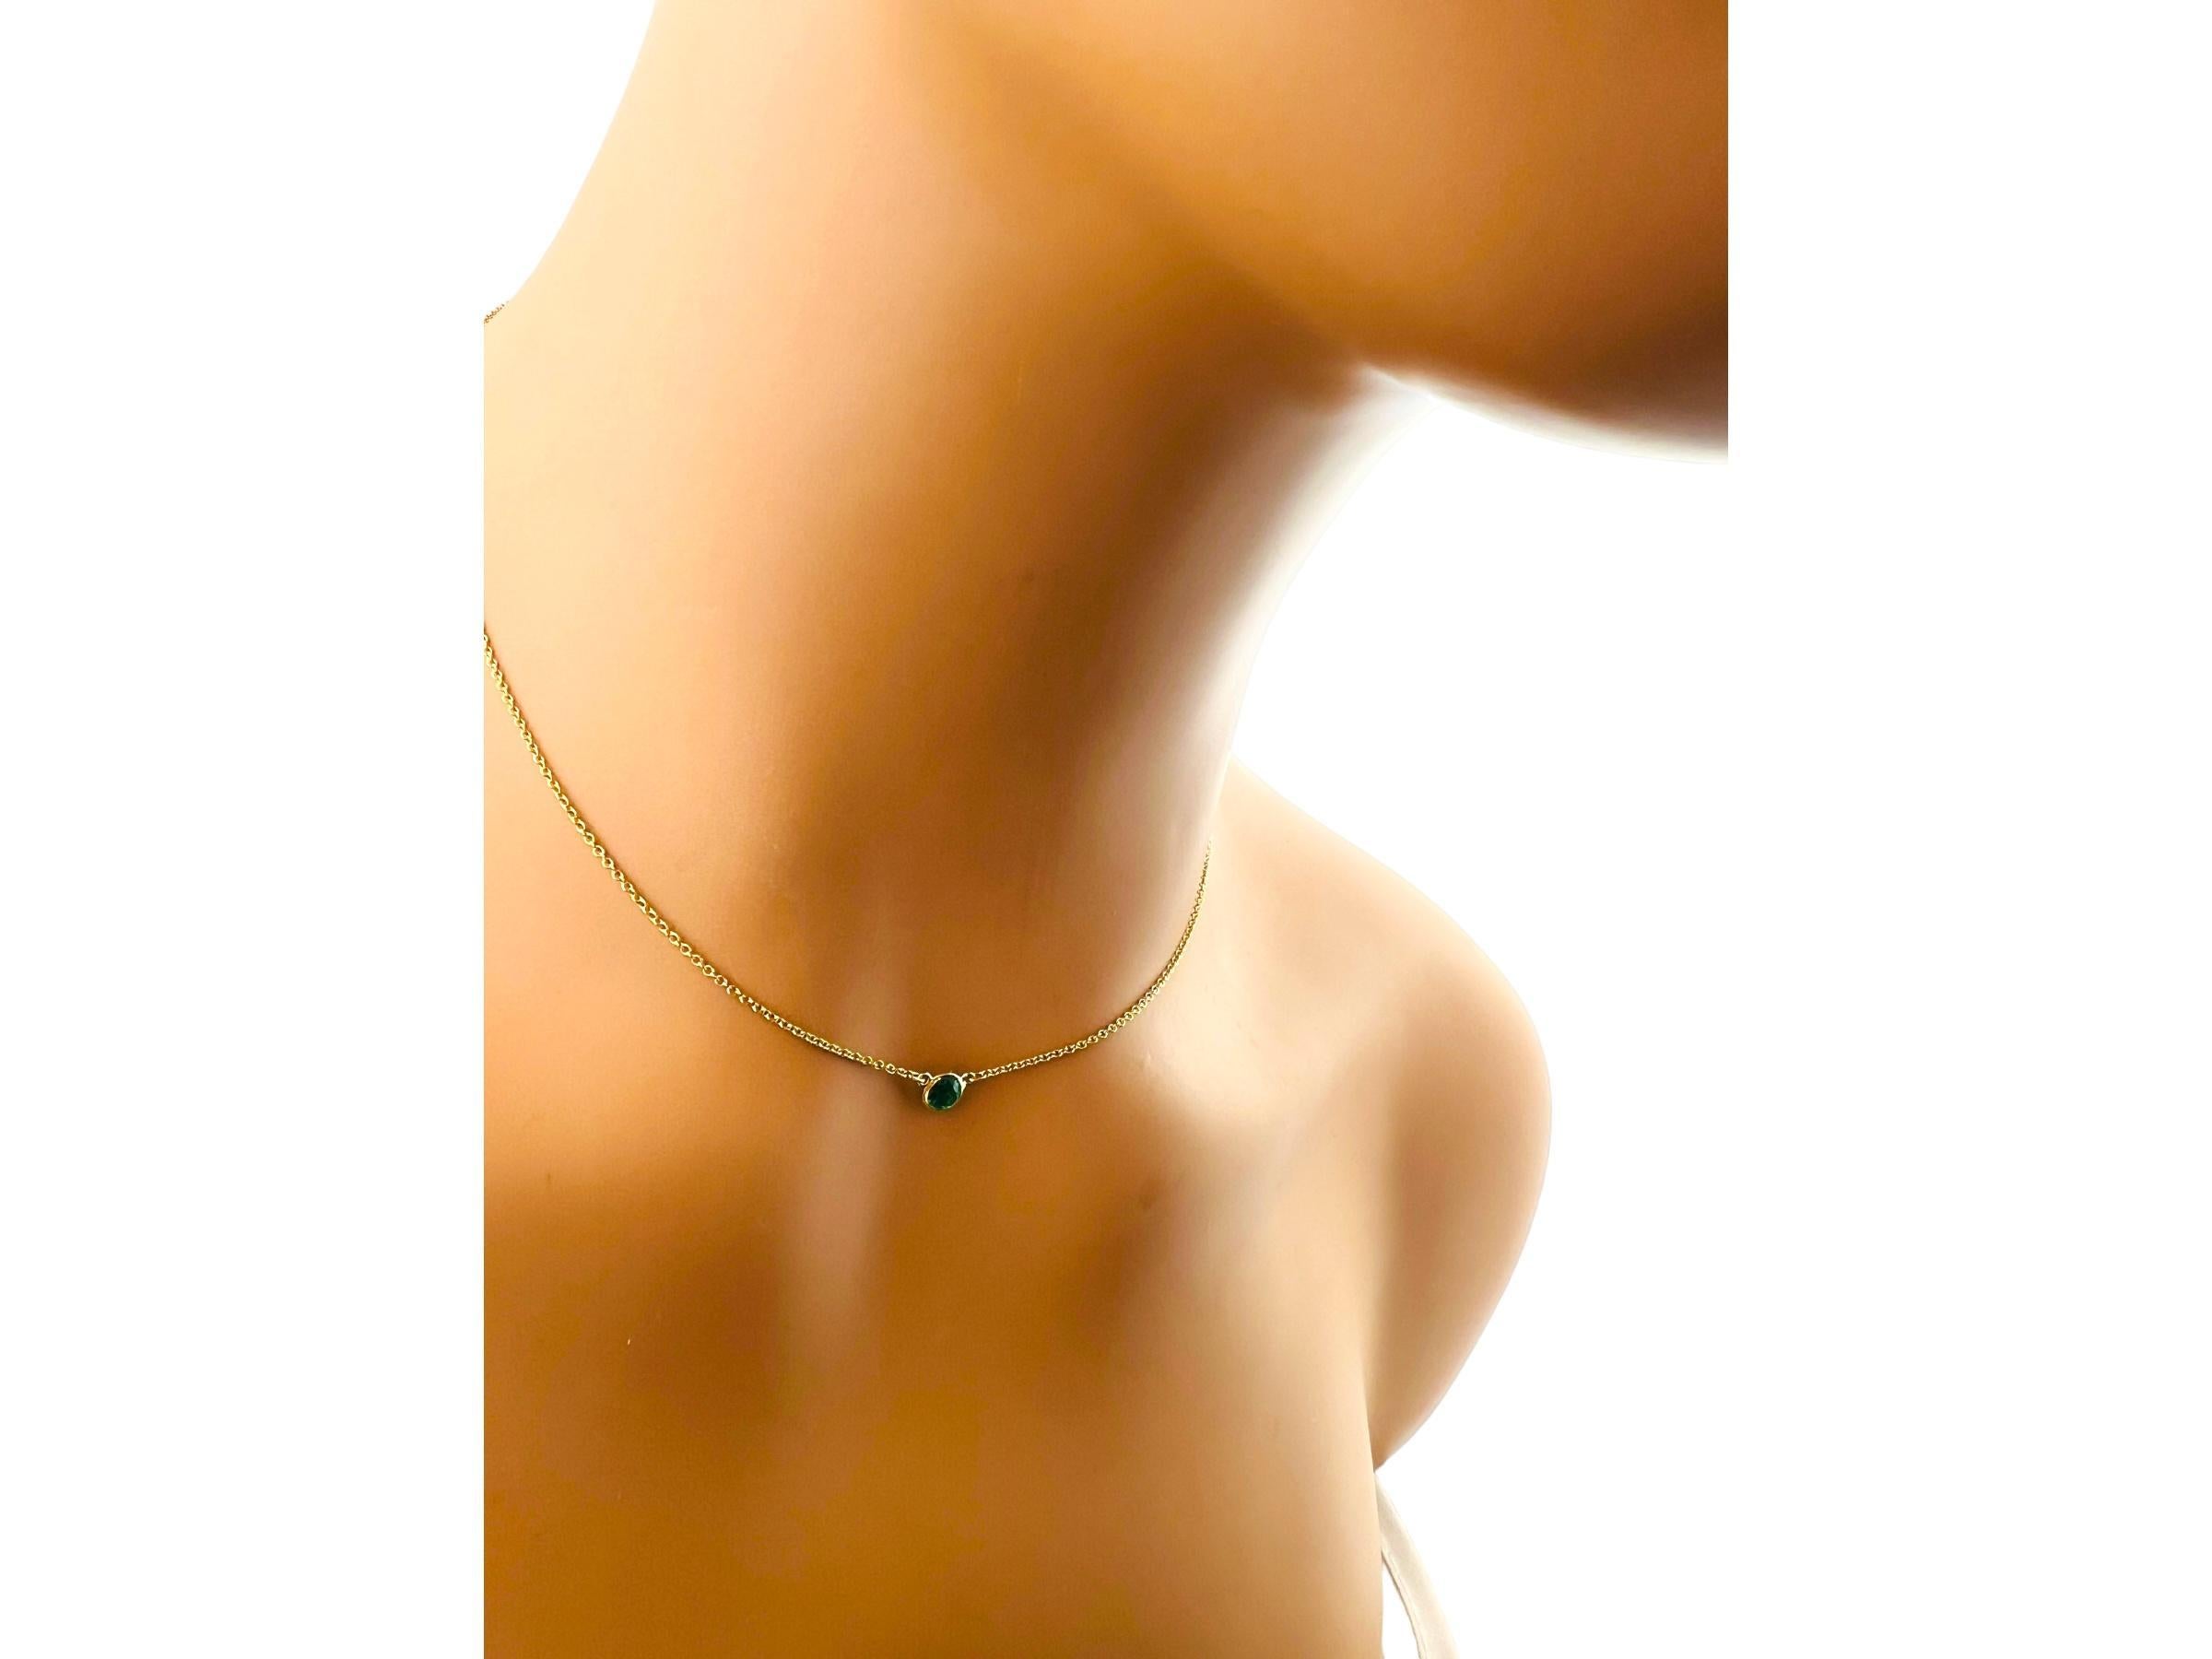 Women's Tiffany & Co. Elsa Peretti 18K Yellow Gold Emerald Color by Yard Necklace #15431